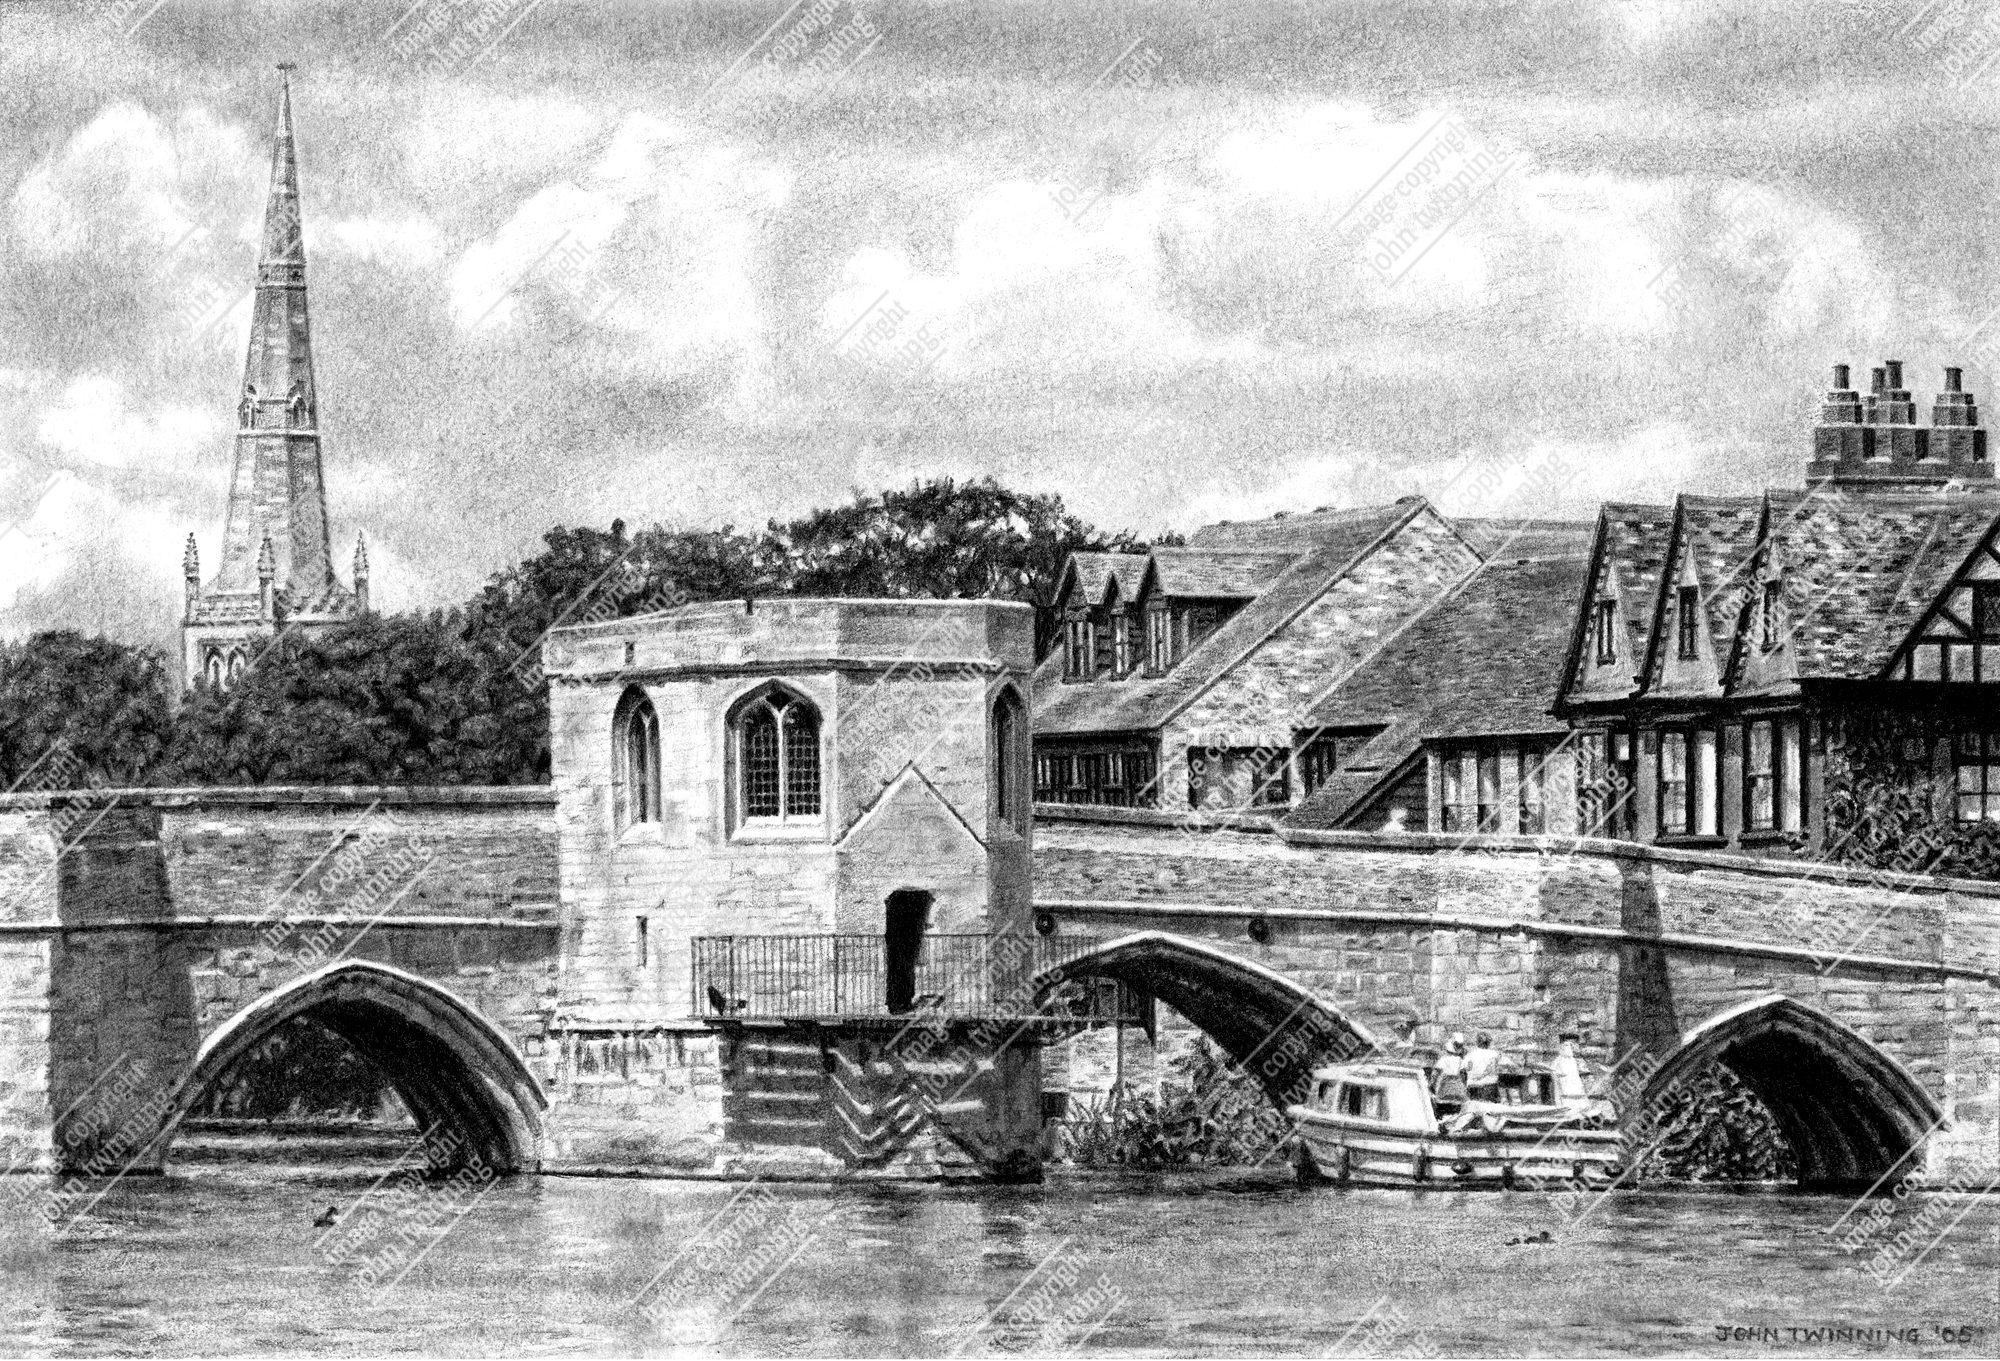 'St. Ives Bridge And Chapel' - art print from a pencil drawing of this cambridgeshire market town's historic bridge